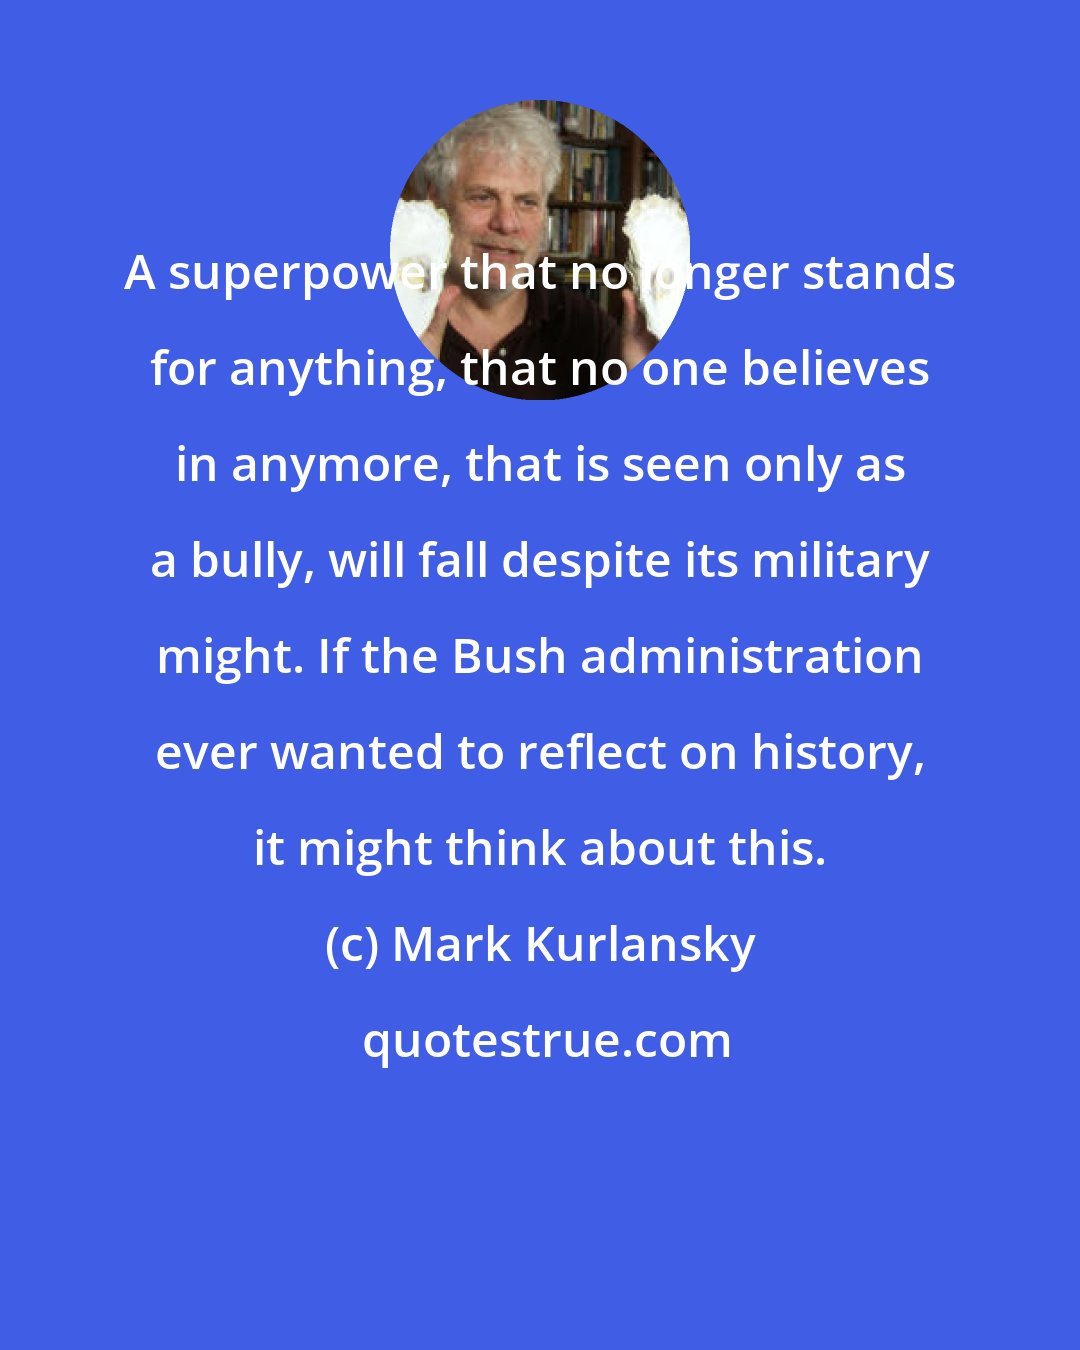 Mark Kurlansky: A superpower that no longer stands for anything, that no one believes in anymore, that is seen only as a bully, will fall despite its military might. If the Bush administration ever wanted to reflect on history, it might think about this.